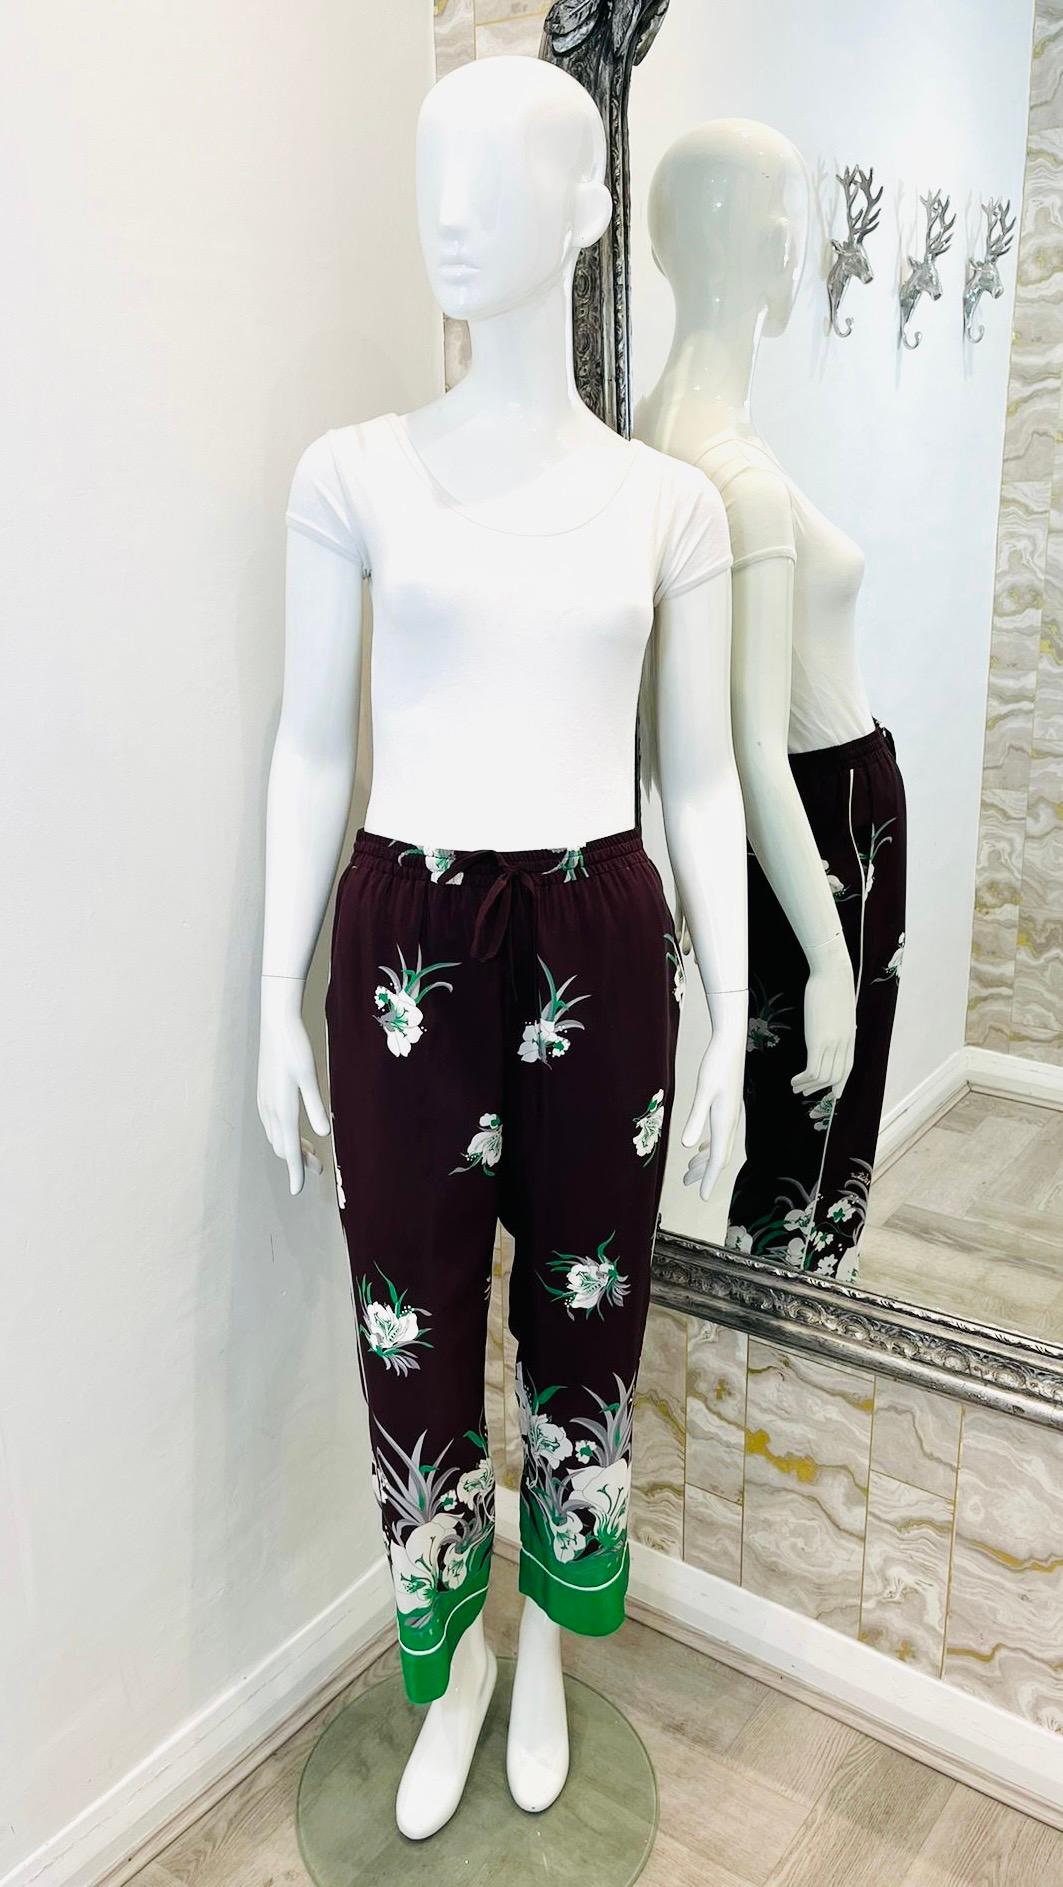 Valentino Silk Printed Trousers

Brown trousers designed with white and green Street Flowers pattern.

Featuring cropped fit, elasticated waist and pockets to rear.

Detailed with 'Valentino' inscription in white to the leg and loose-fit. 

Matching